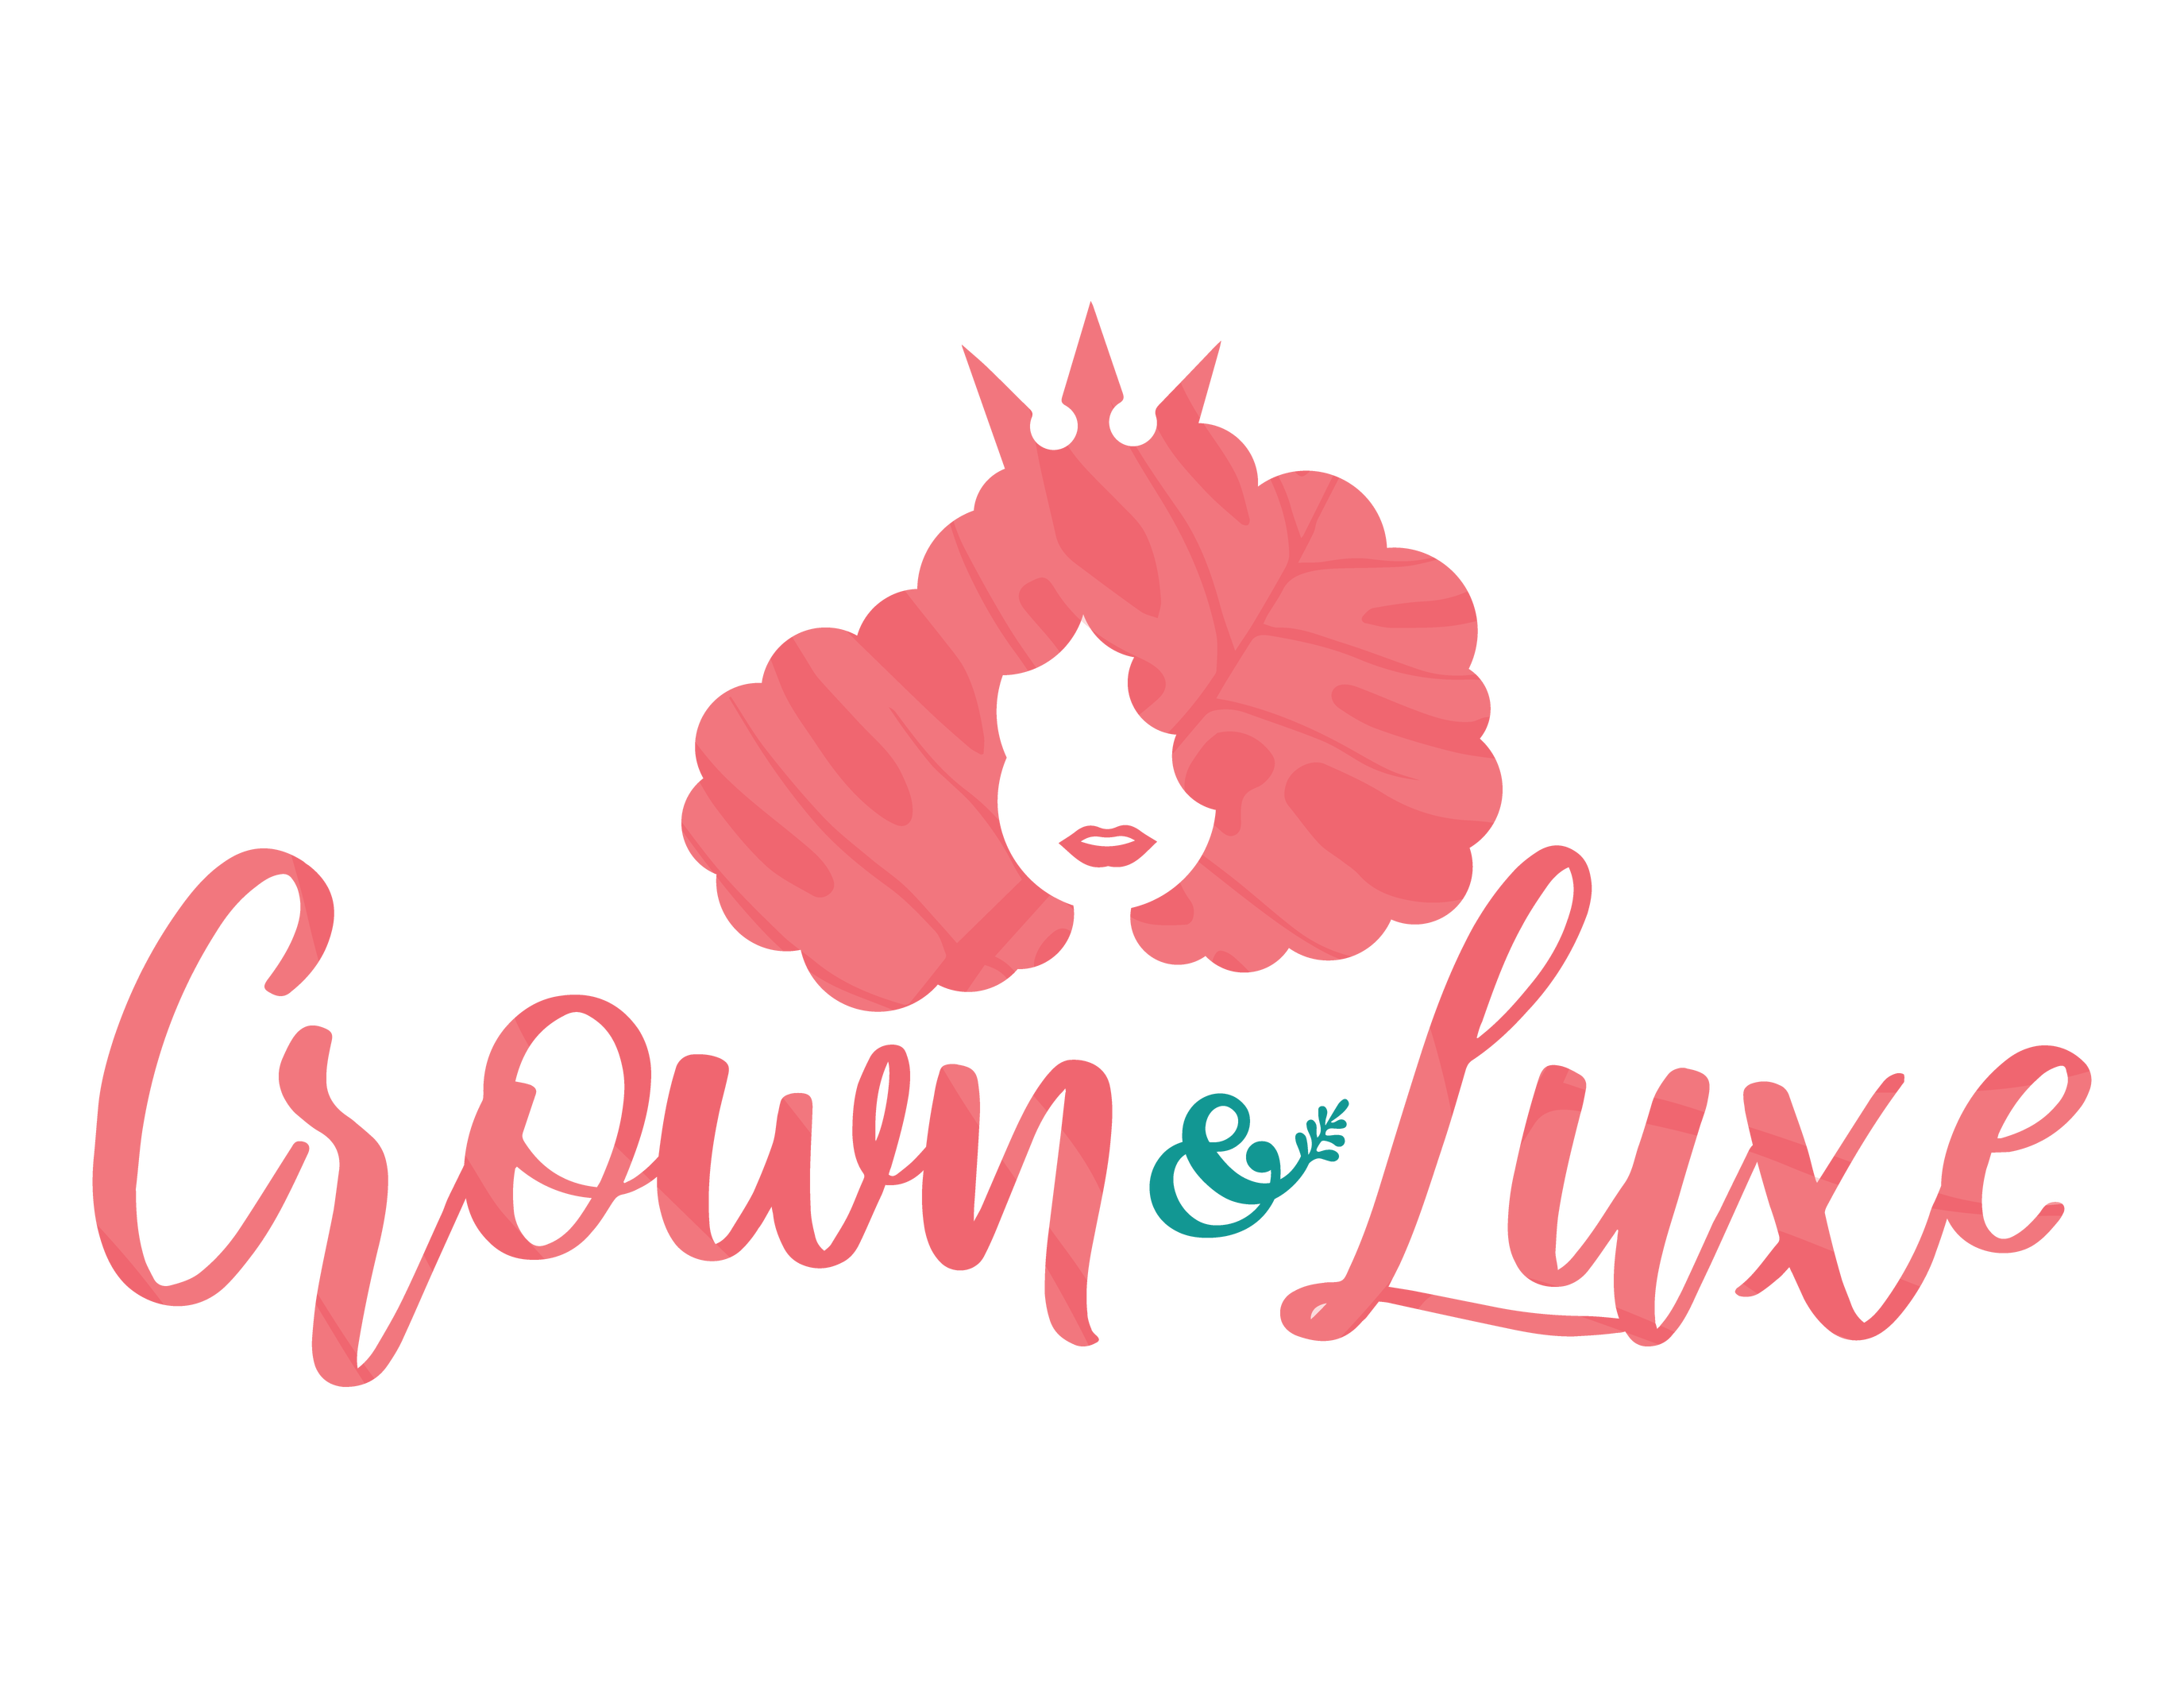 Crown and Luxe